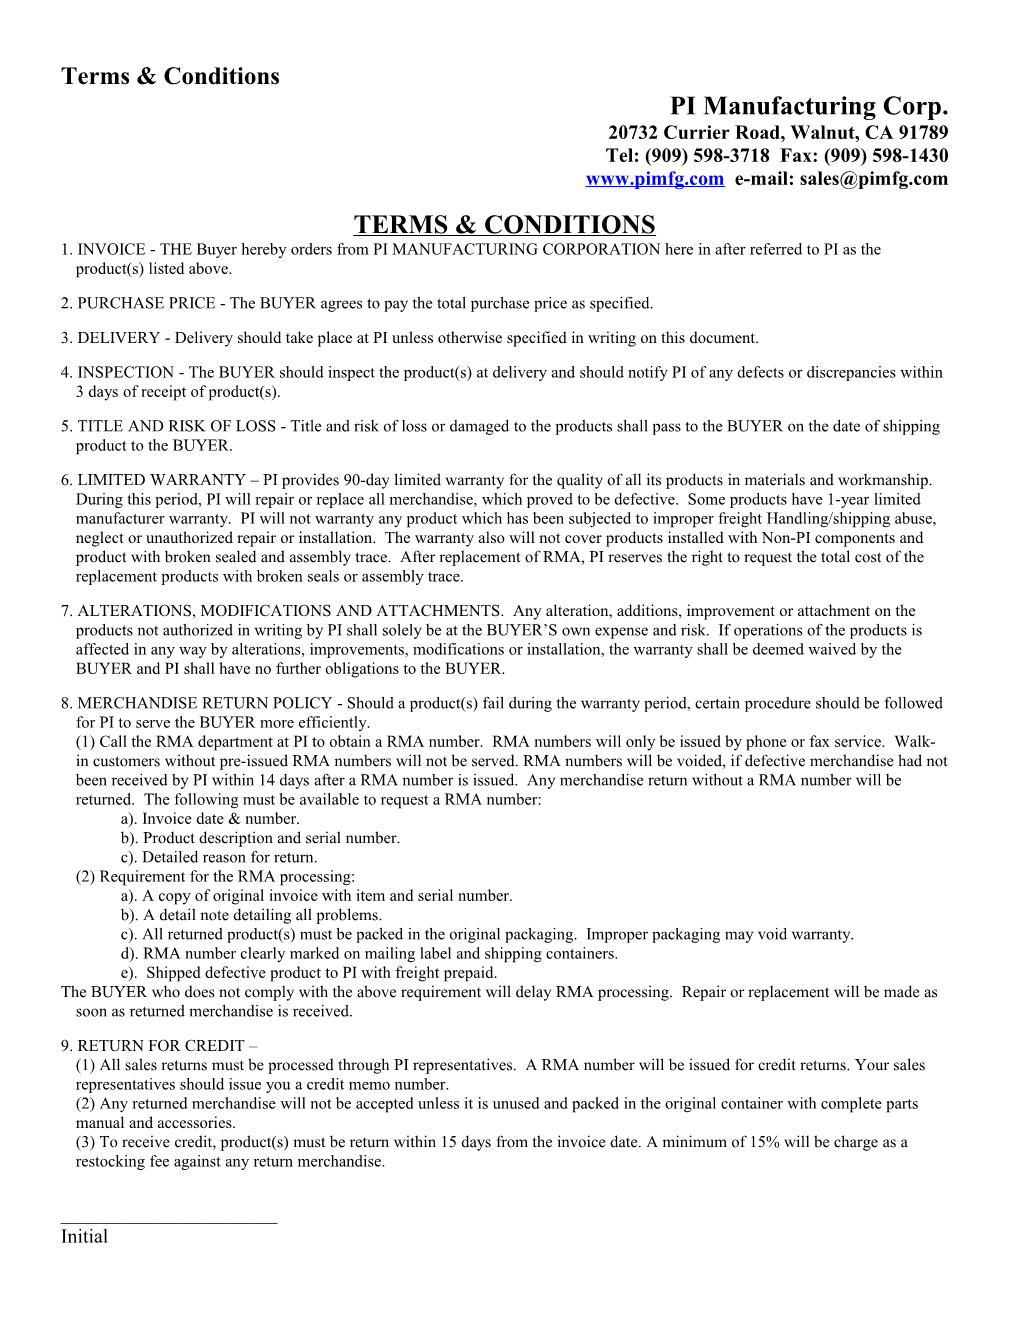 Terms & Conditions s4